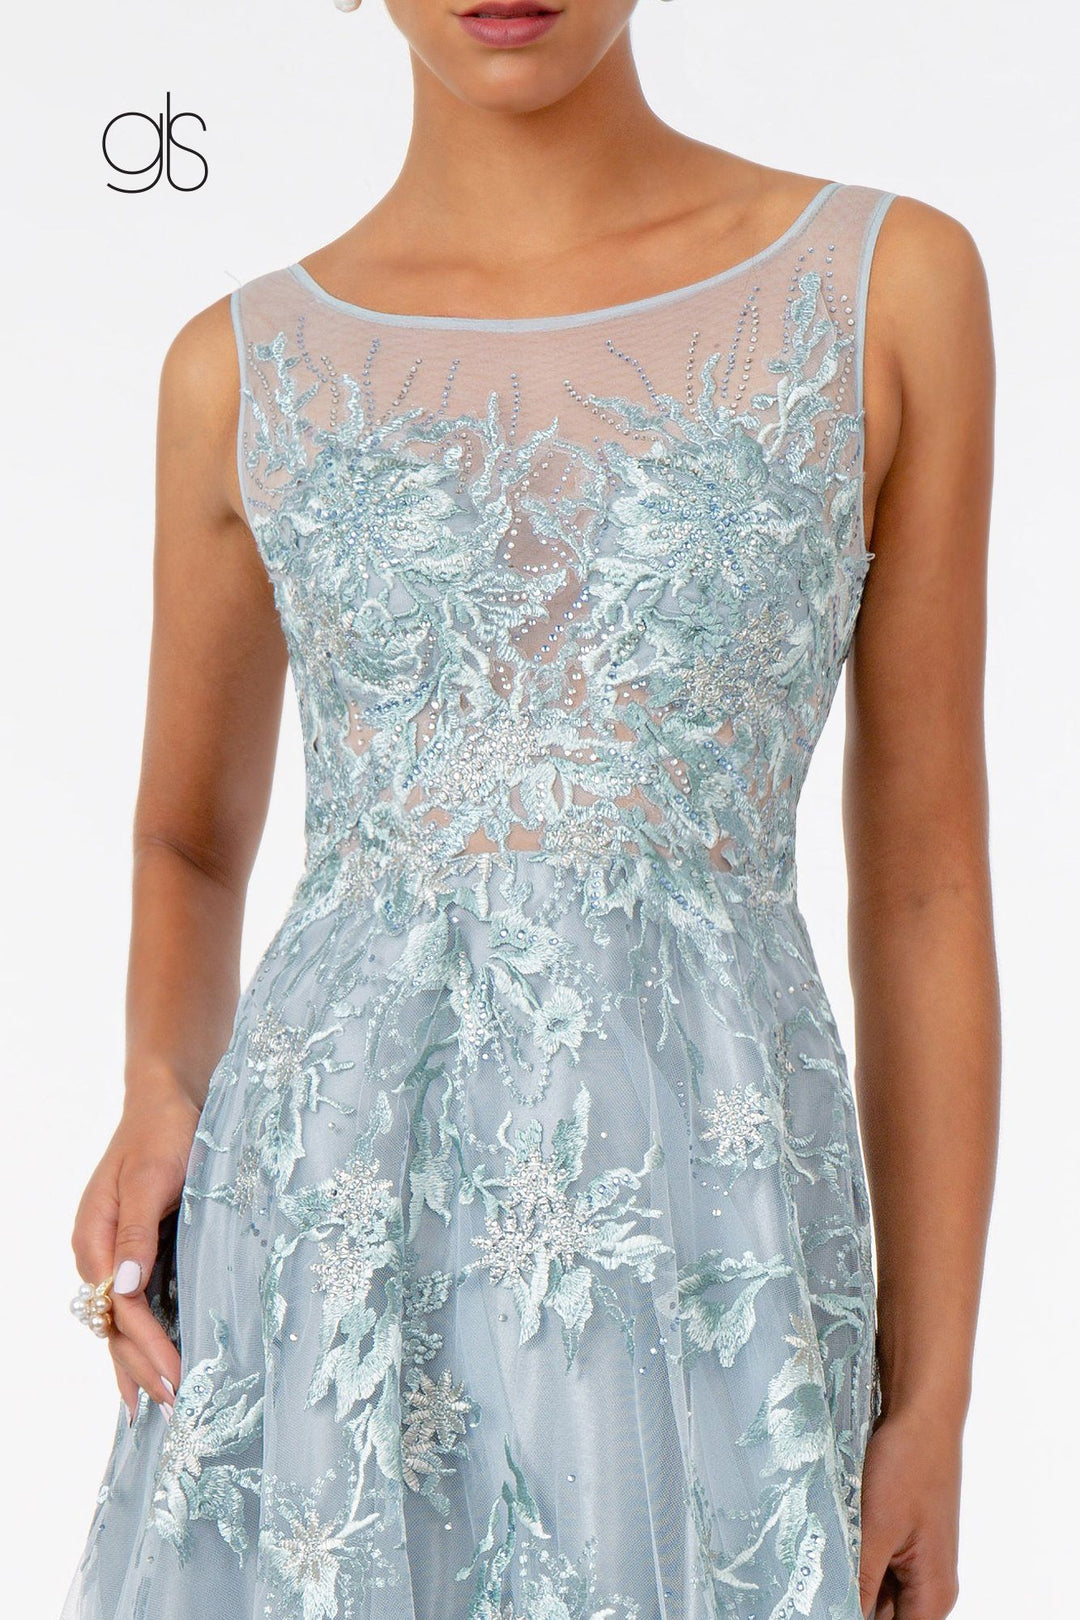 Embroidered Long A-line Sleeveless Dress by Elizabeth K GL2979